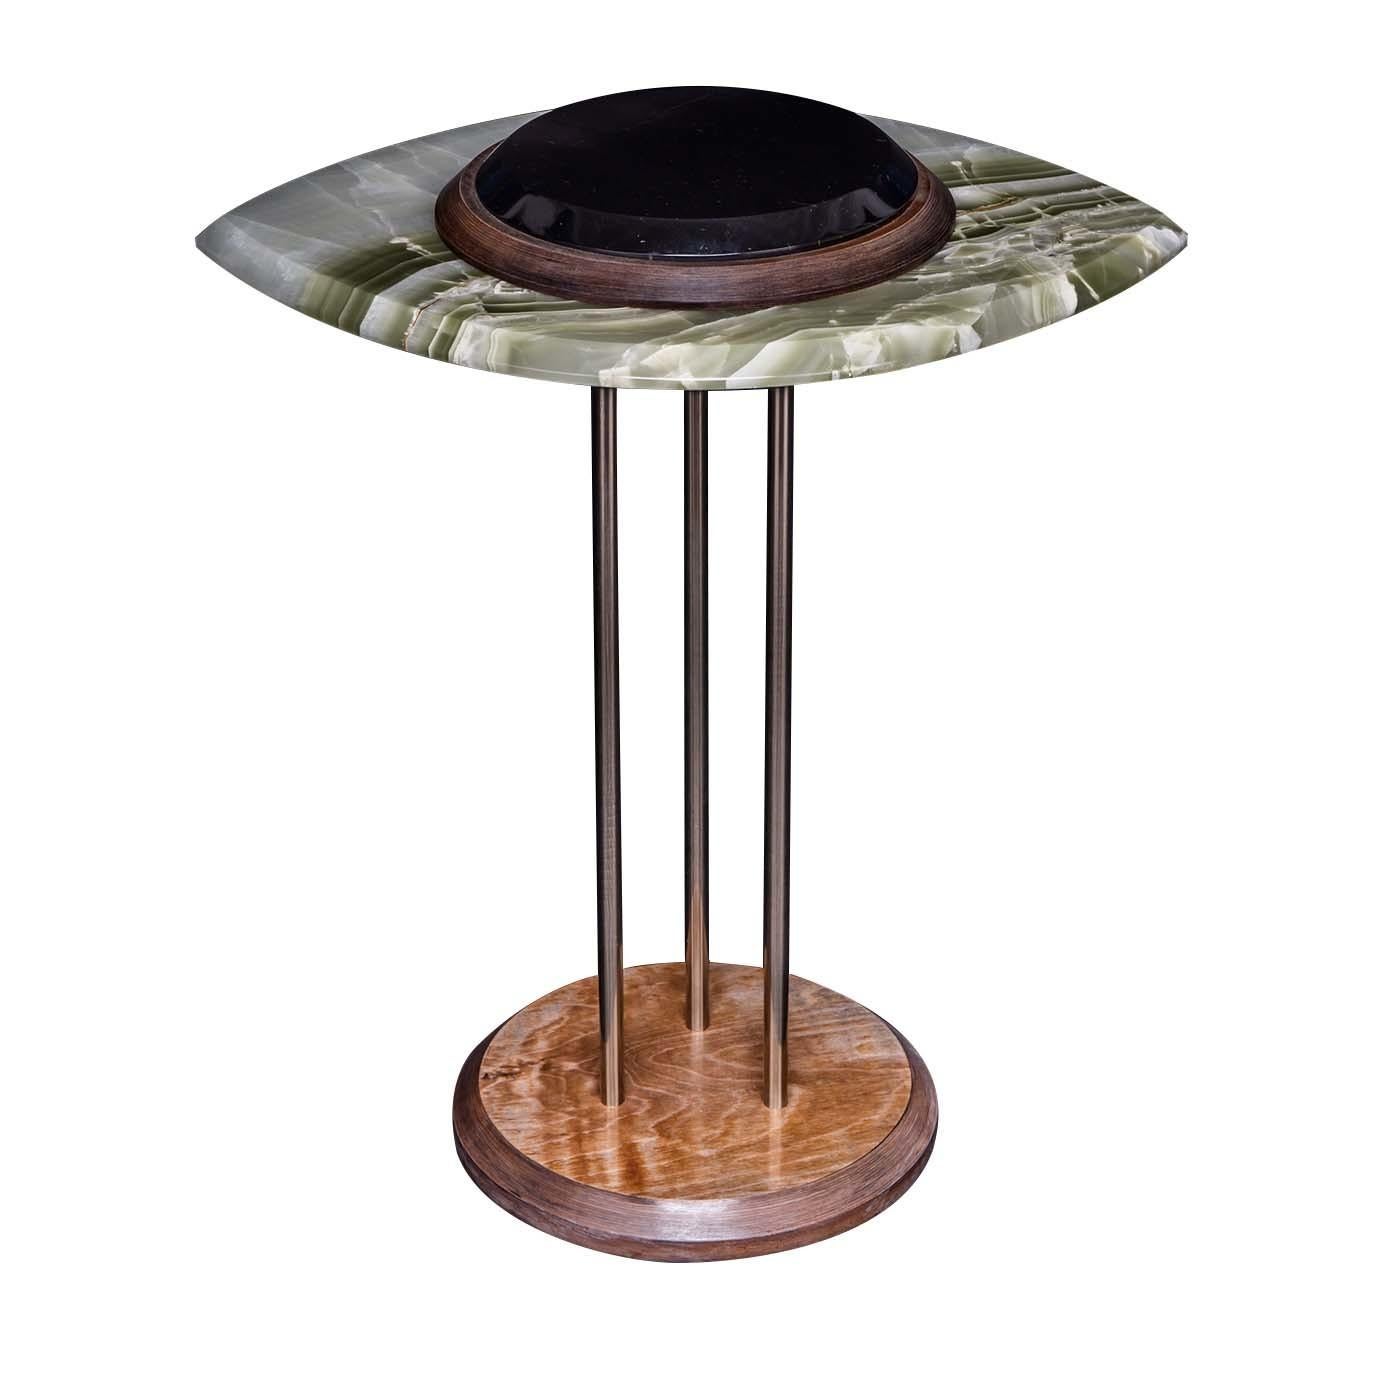 The Eye Side Table in Green and Black